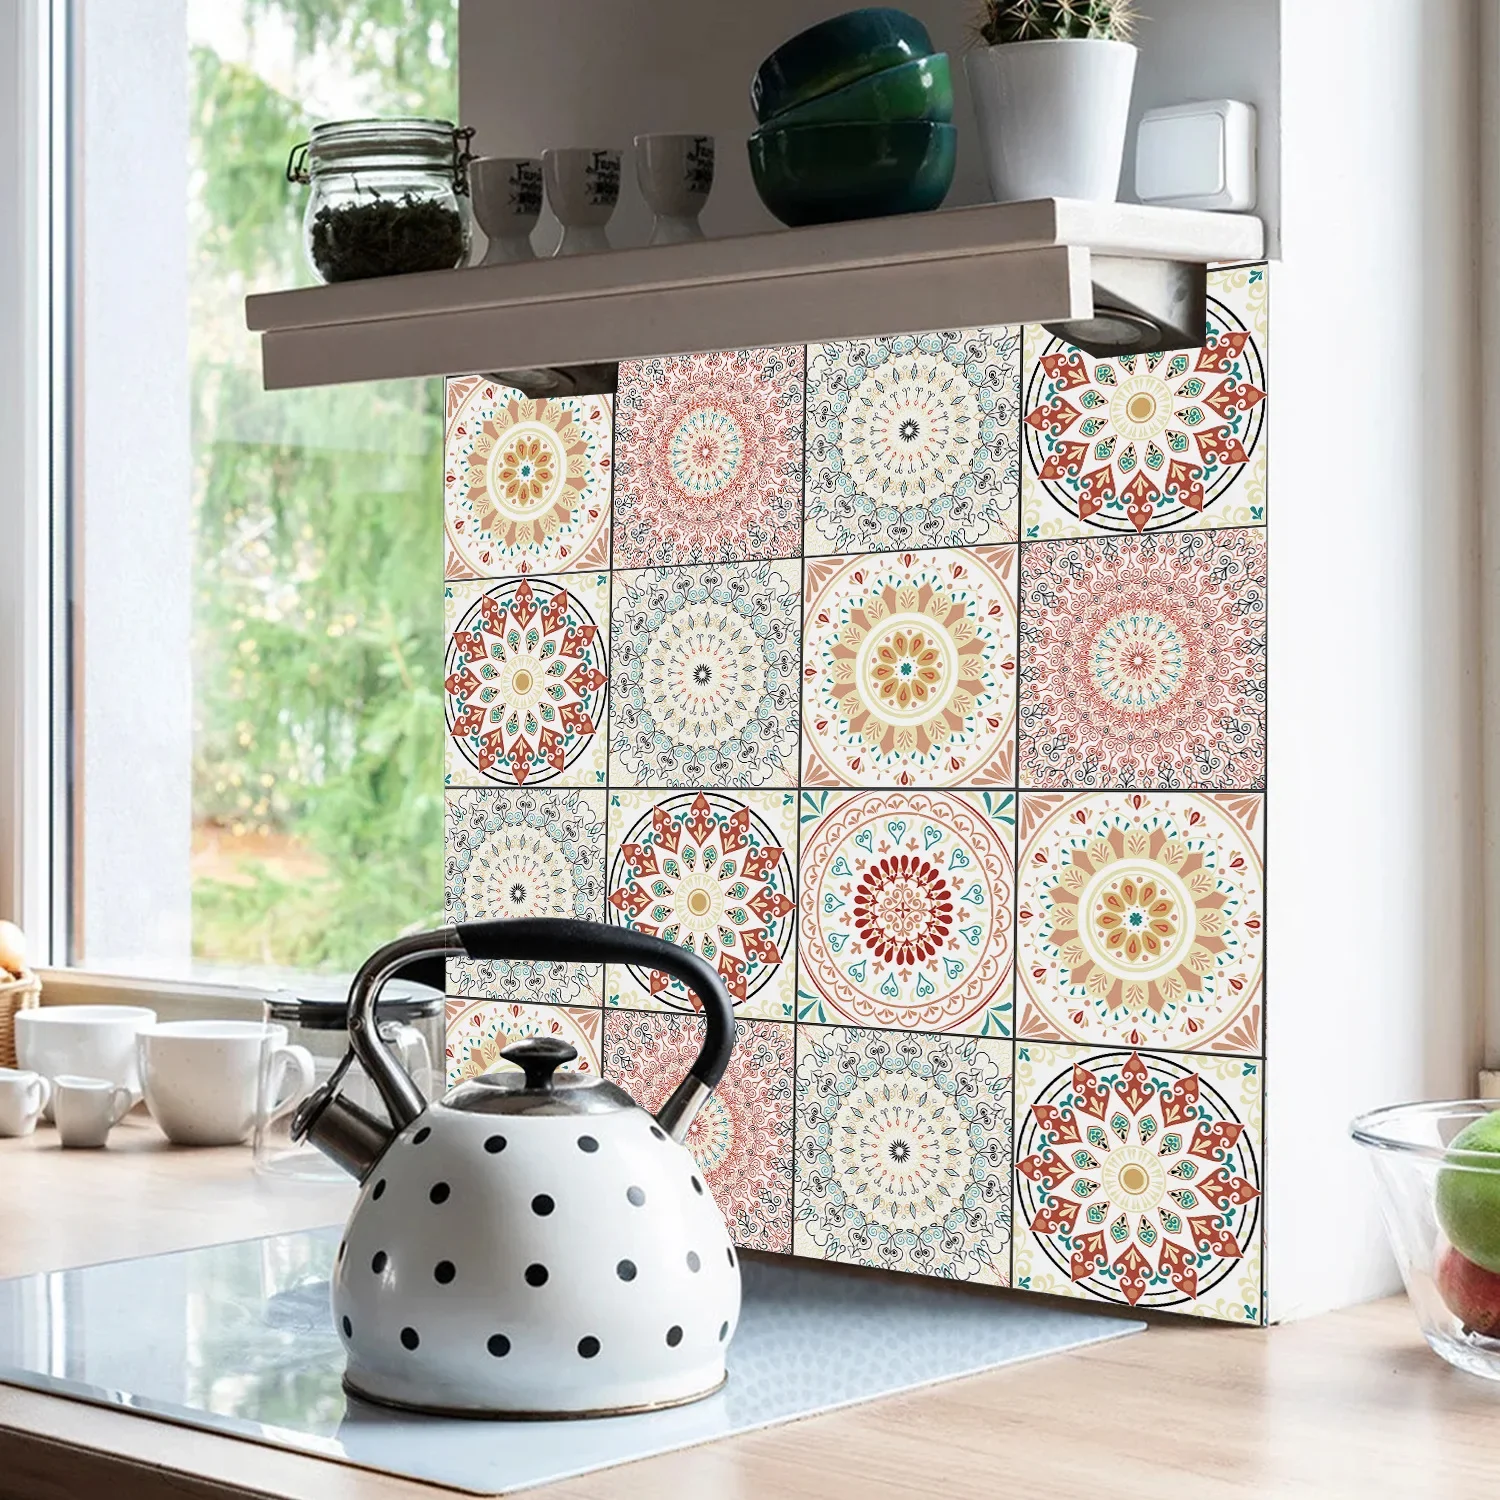 

Hand-Painted Tile Stickers Floor Decoration Kitchen Bathroom Self-Adhesive Waterproof Thickened Frosted Wallpaper 20*20cm*5pcs